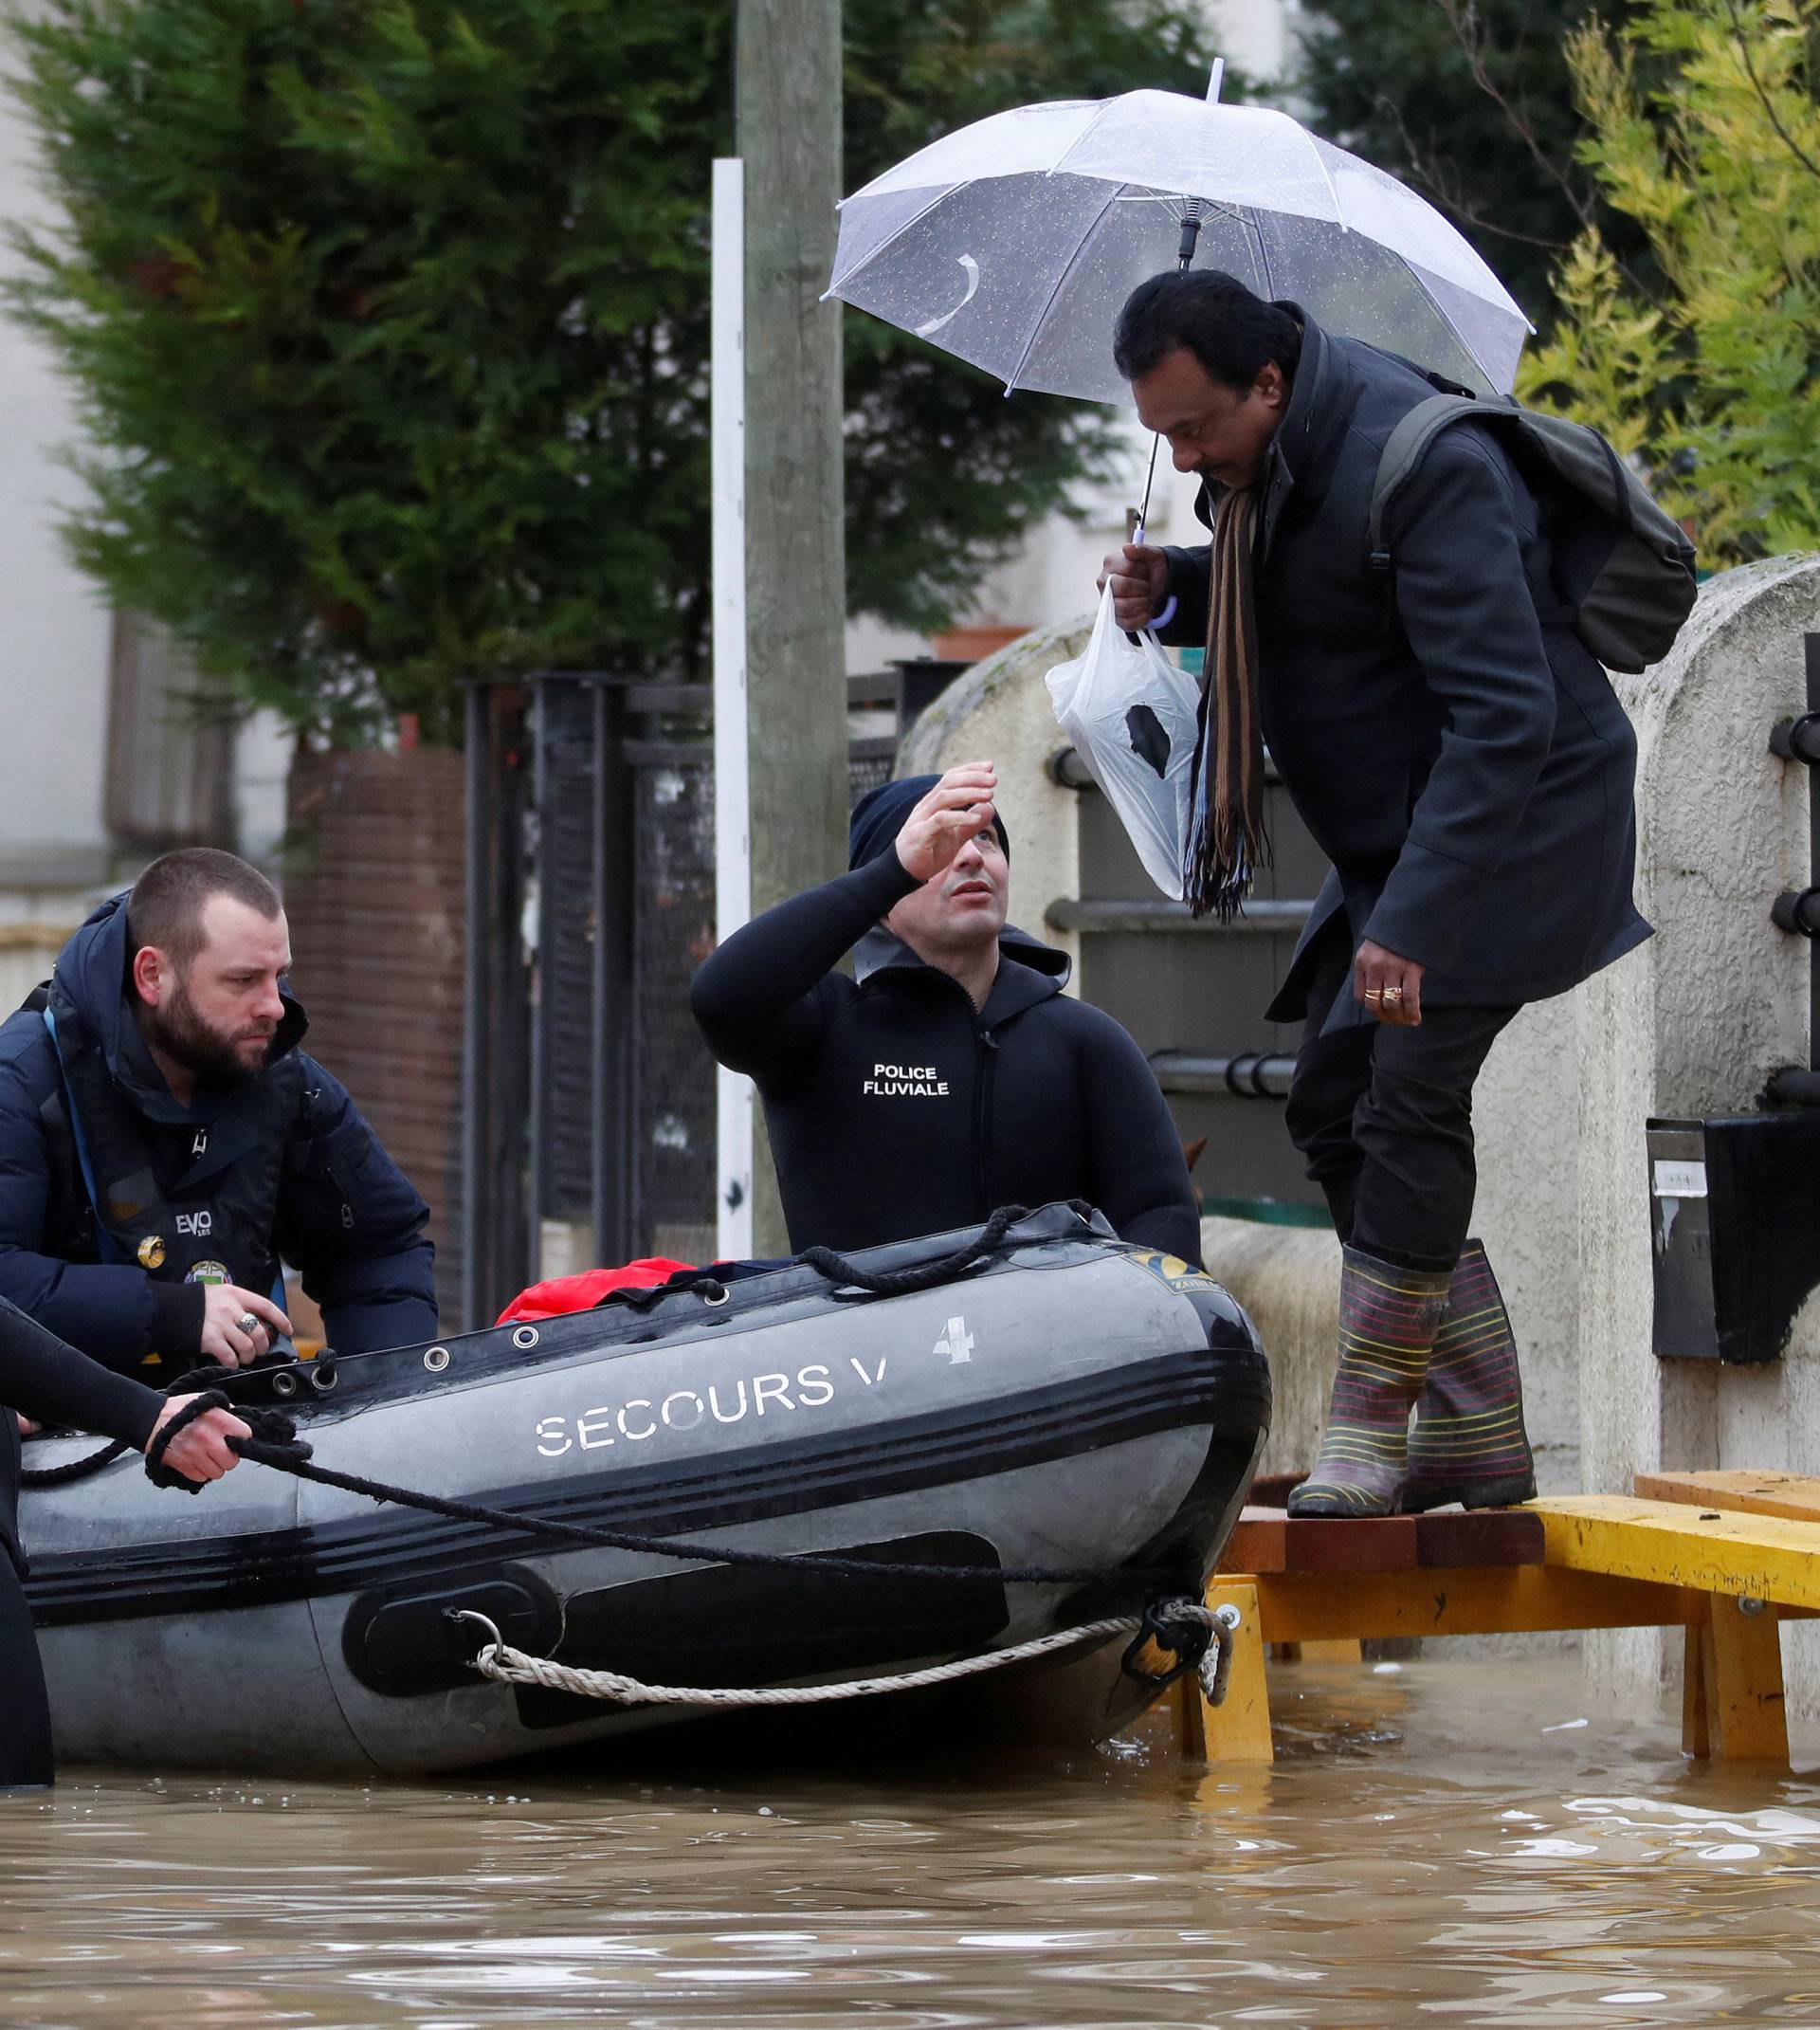 Paris police divers using a small boat patrol a flooded street of a residential area in Villeneuve-Saint-Georges